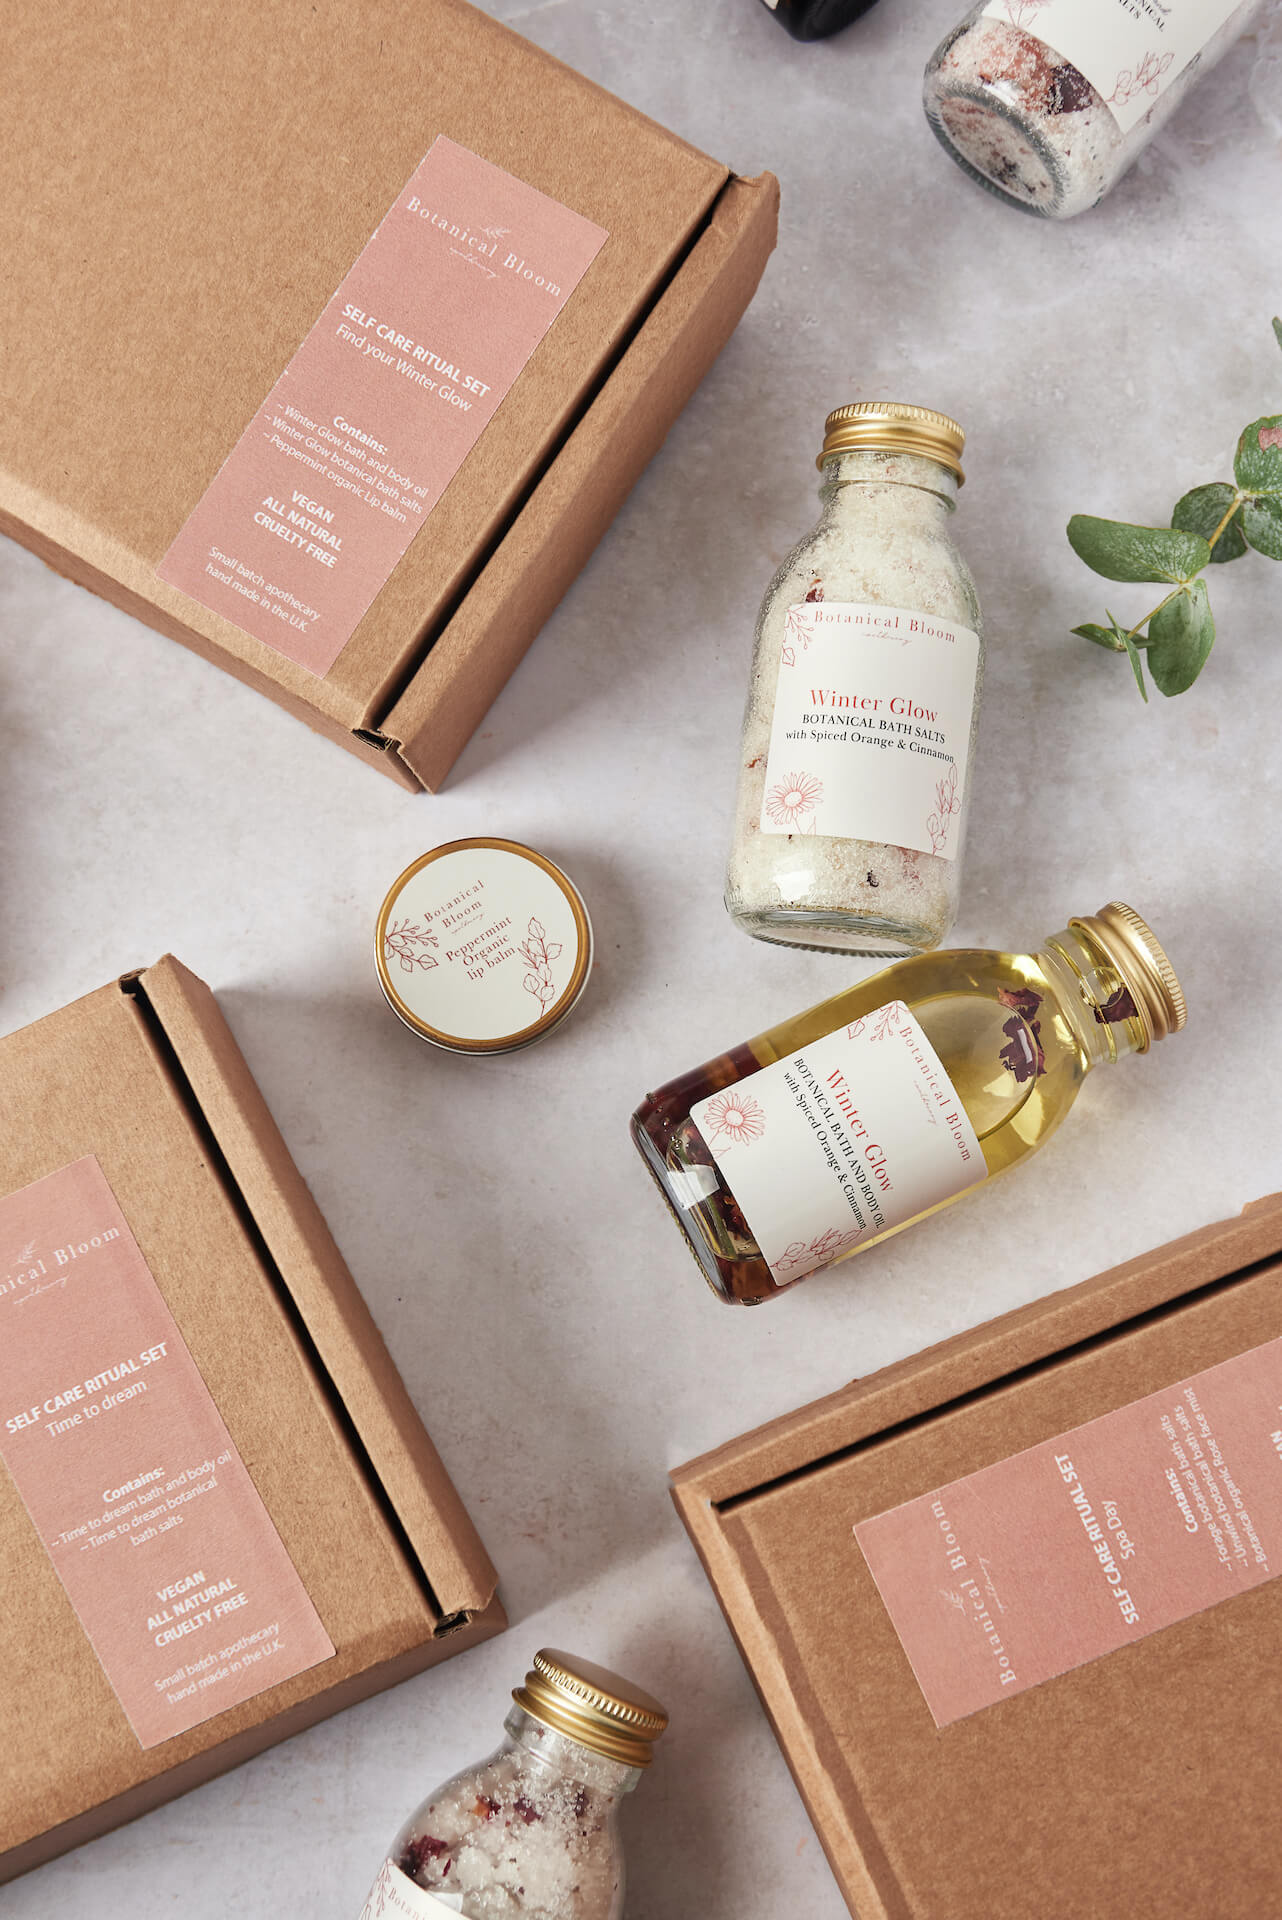 Build your own Self Care ritual Gift set